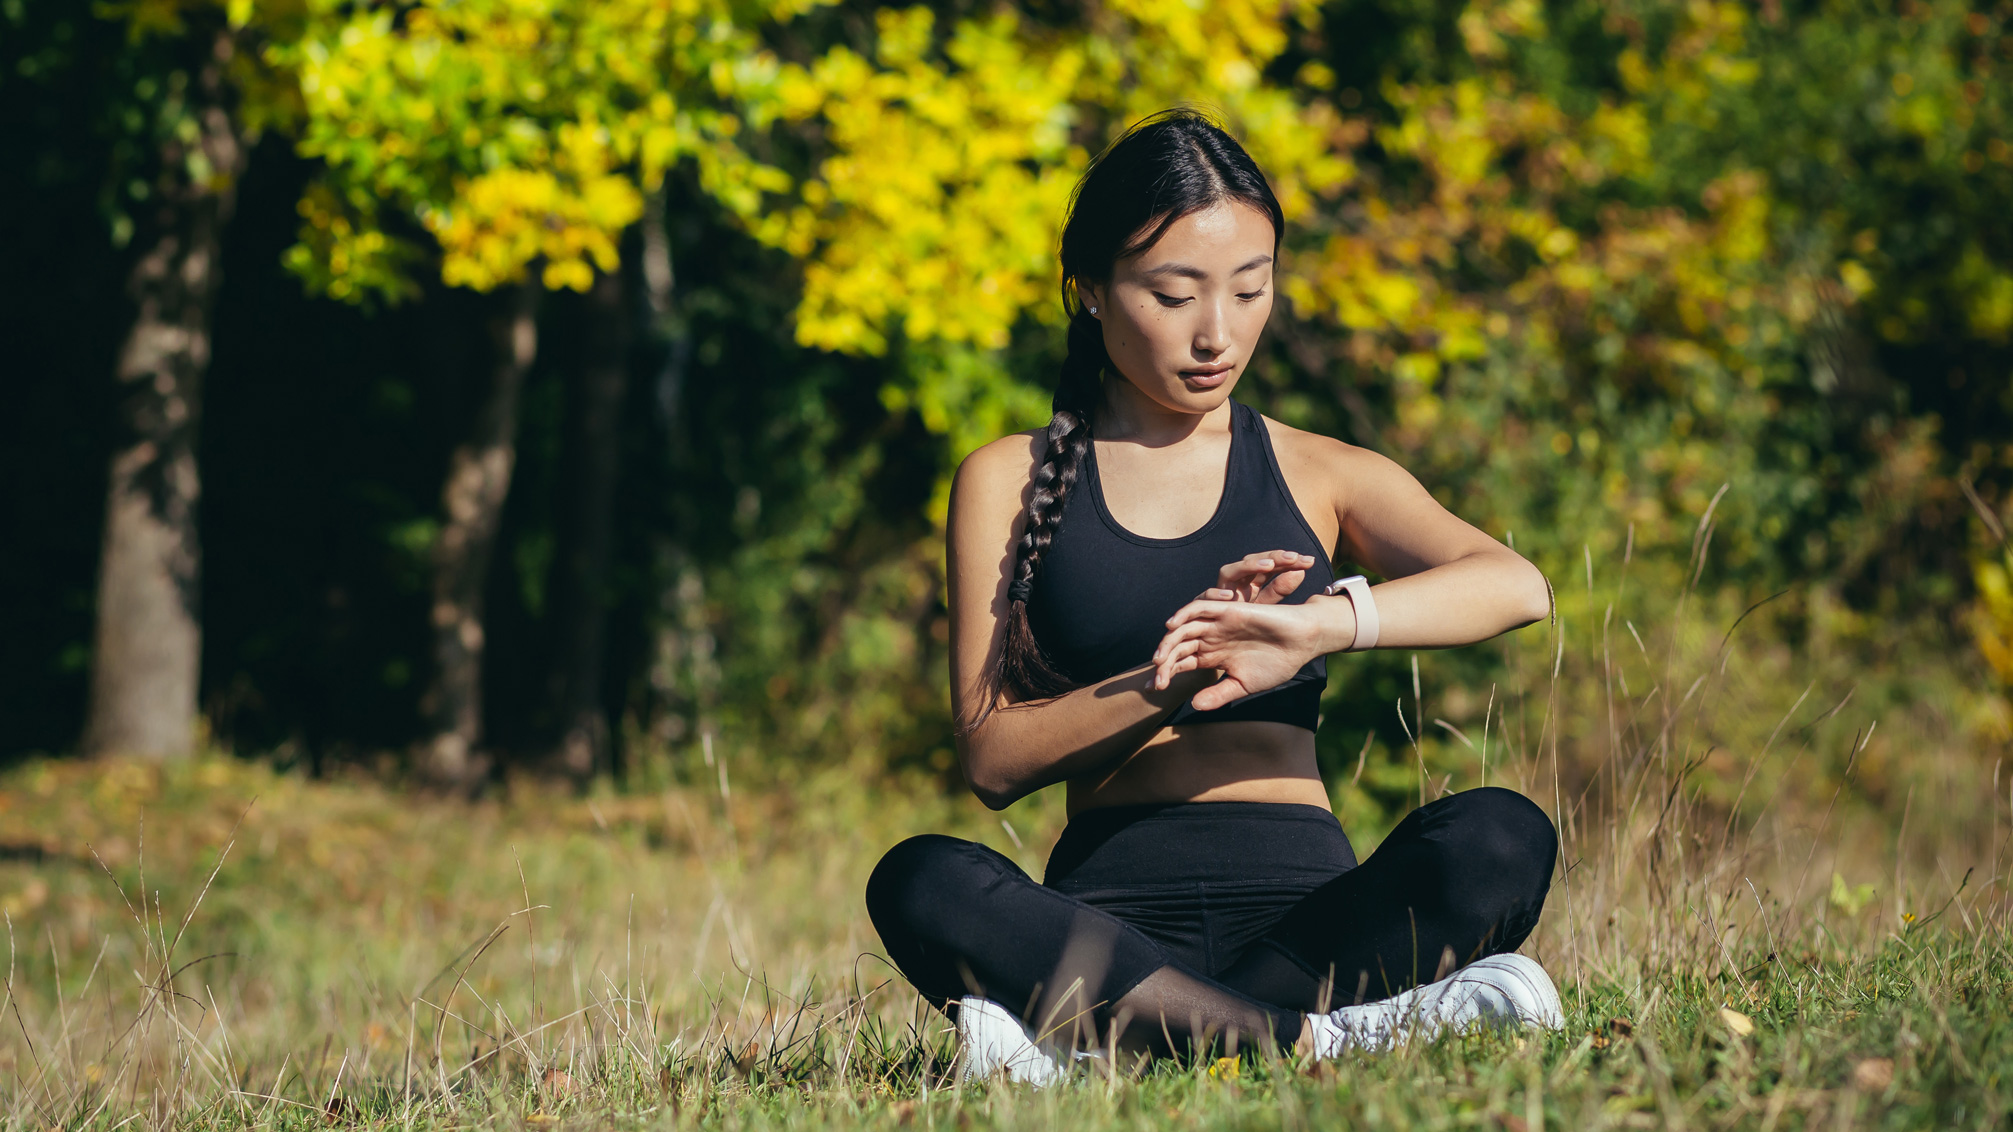 No, tracking yoga with your Fitbit or Garmin isn't completely